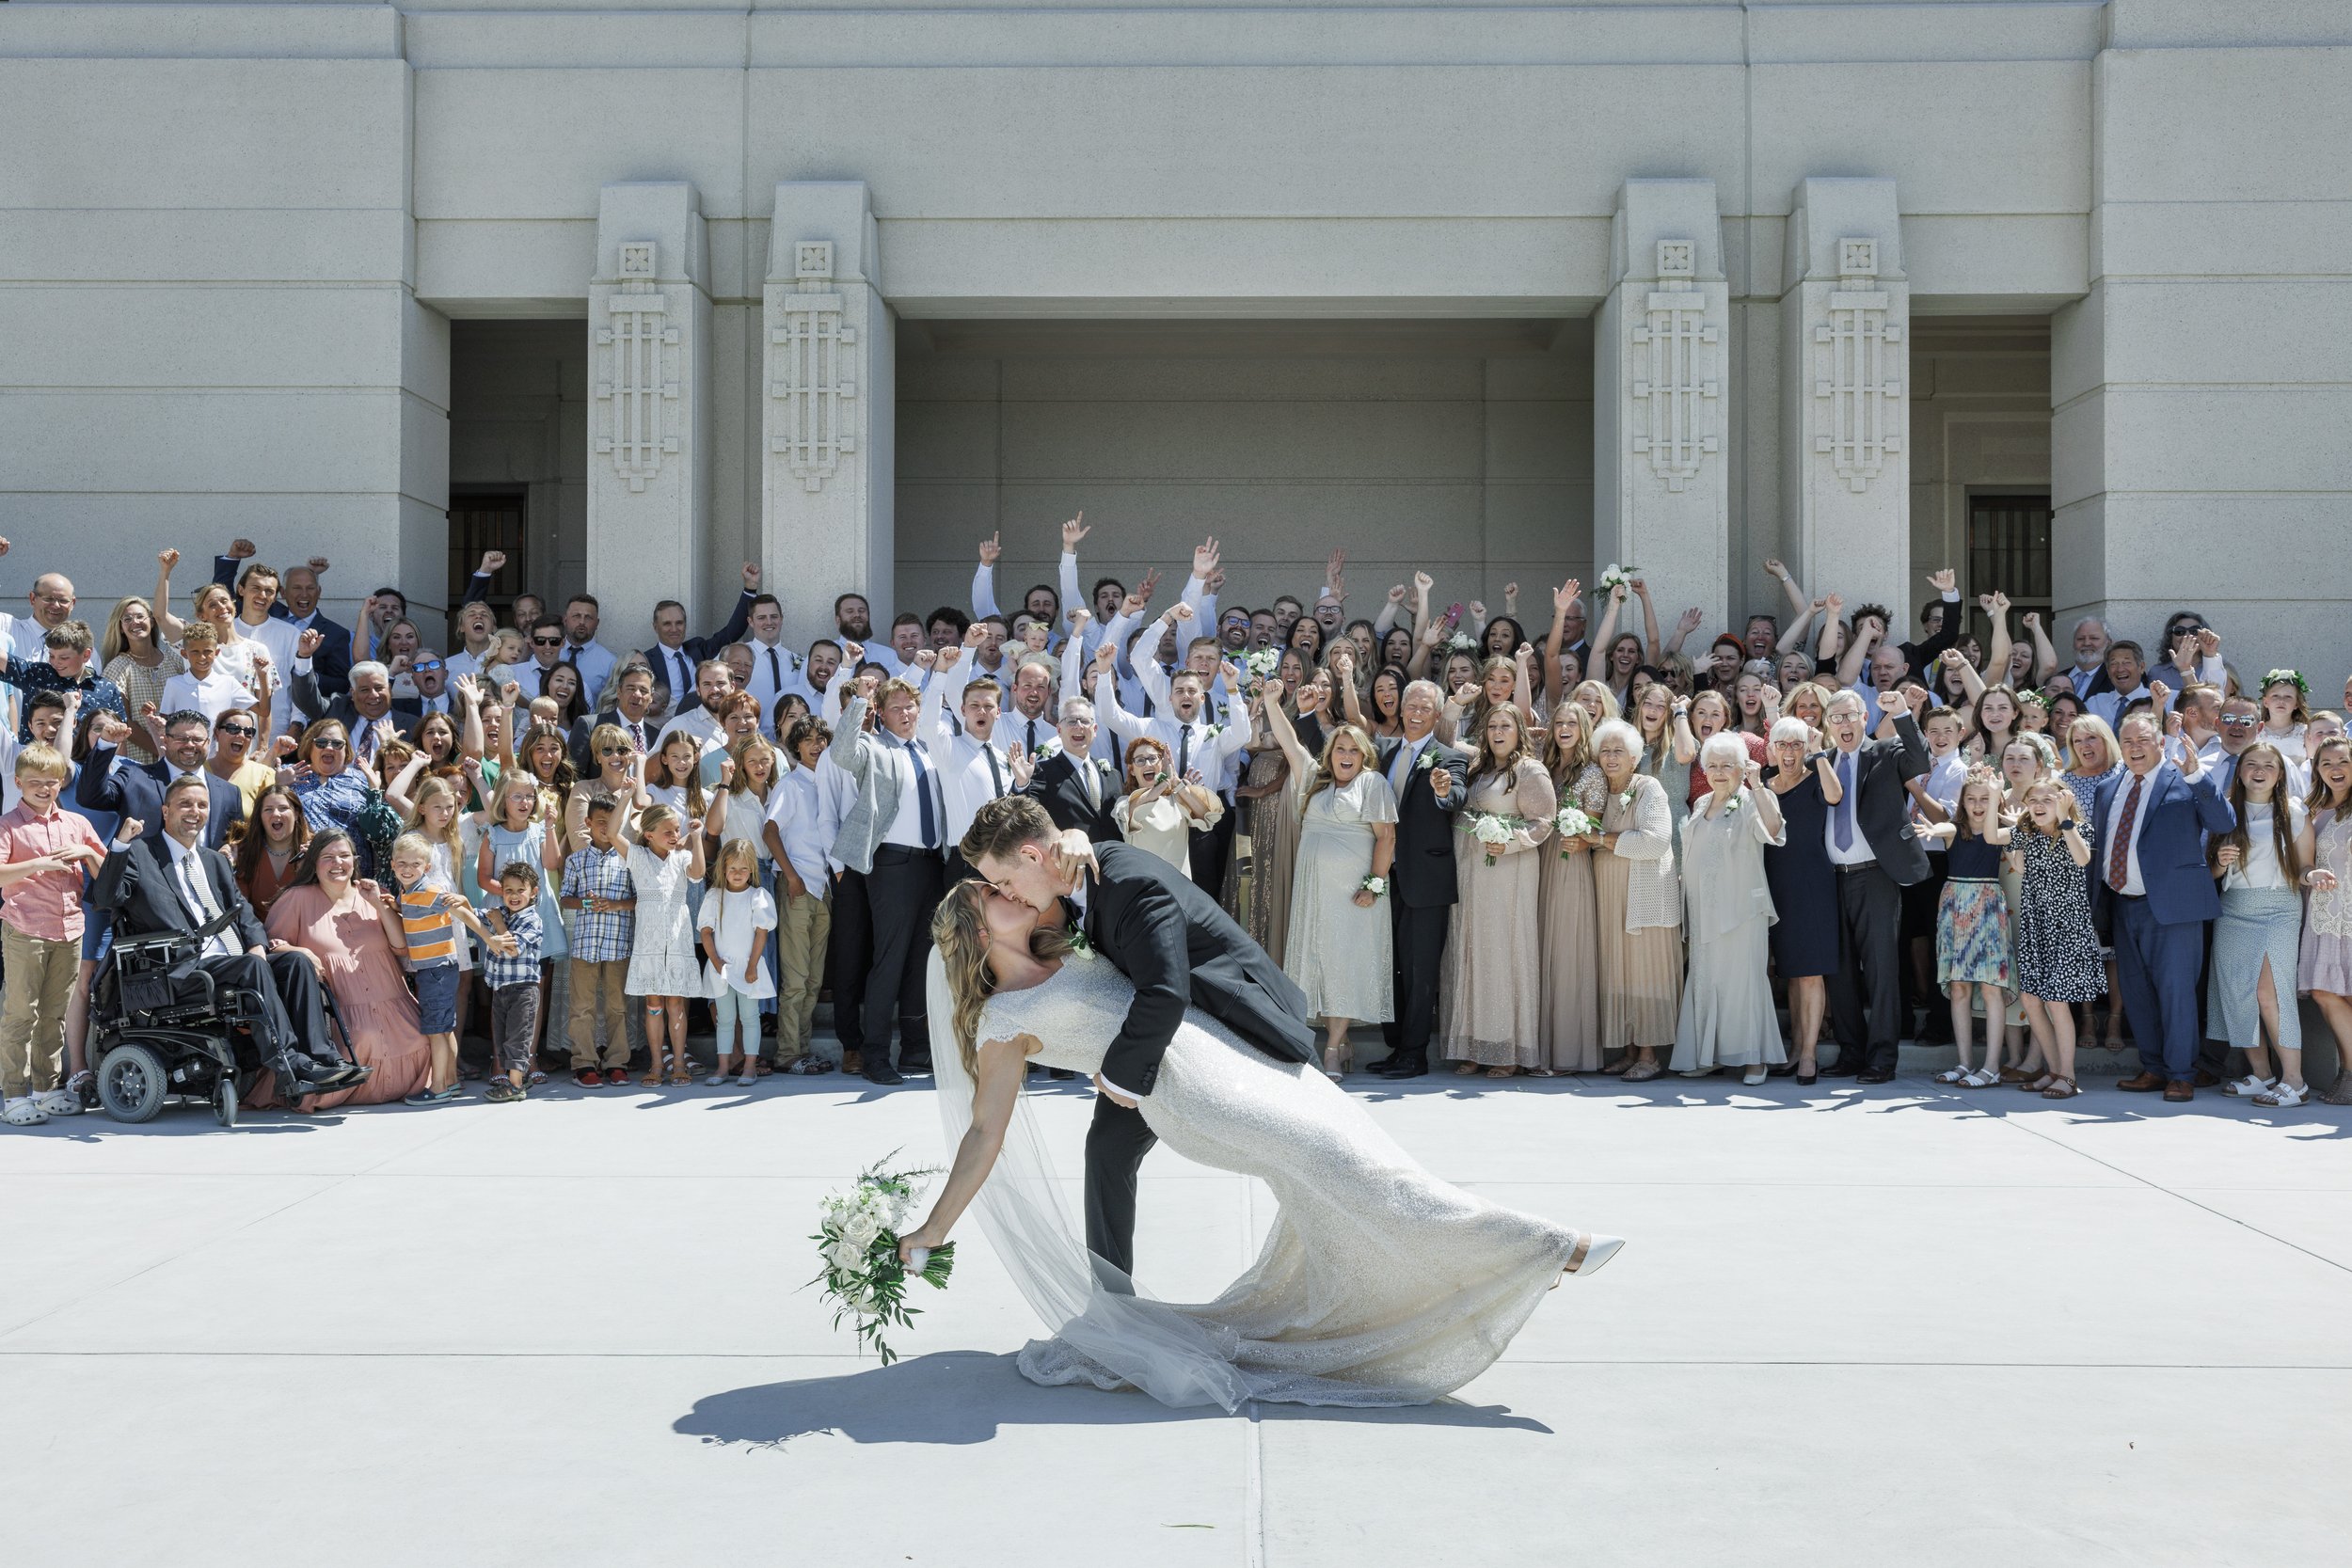  Groom dipping his new wife for a kiss in front of the Meridian, Idaho LDS Temple surrounded by loved ones. #tonygrove #cachevalley #utahbride #ldstemplewedding #savannarichardsonphotography #utahweddingphotographer #summerwedding #outdoorreception 